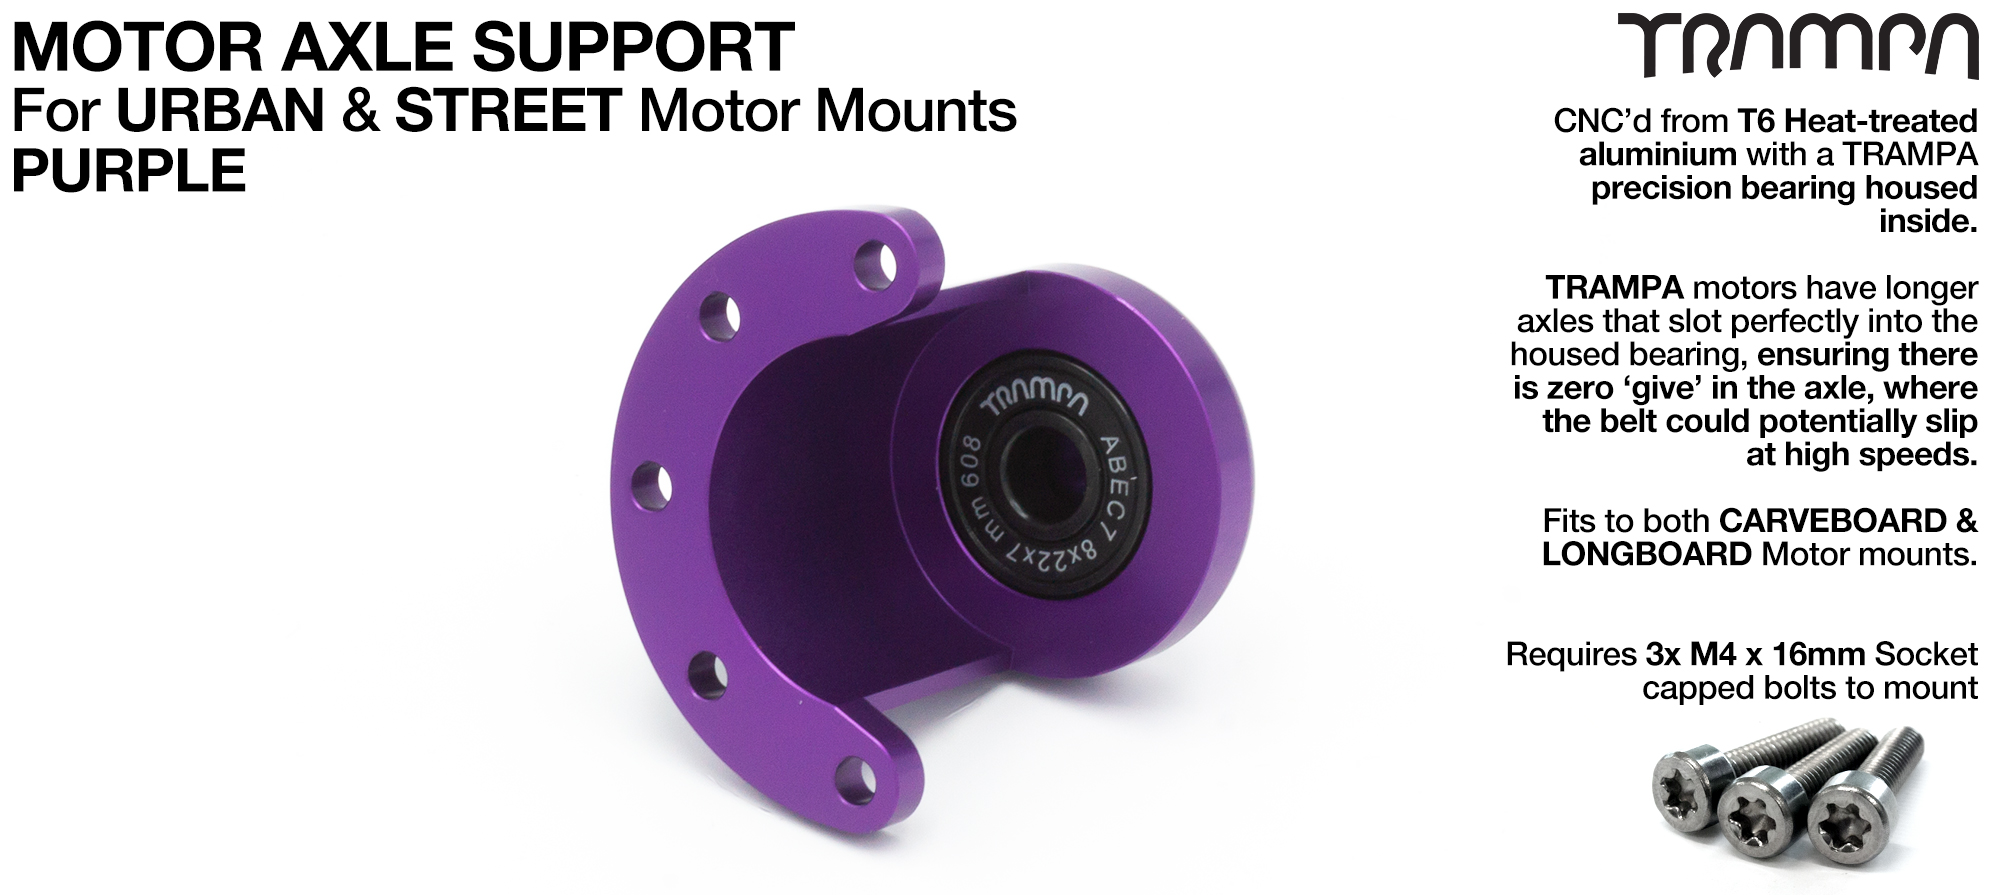 Motor Axle Support Housing with TRAMPA R608 8x22x7mm Bearing, C-Clip & Stainless Steel fixing Bolts for ORRSOM Longboard Motor Mounts  - PURPLE